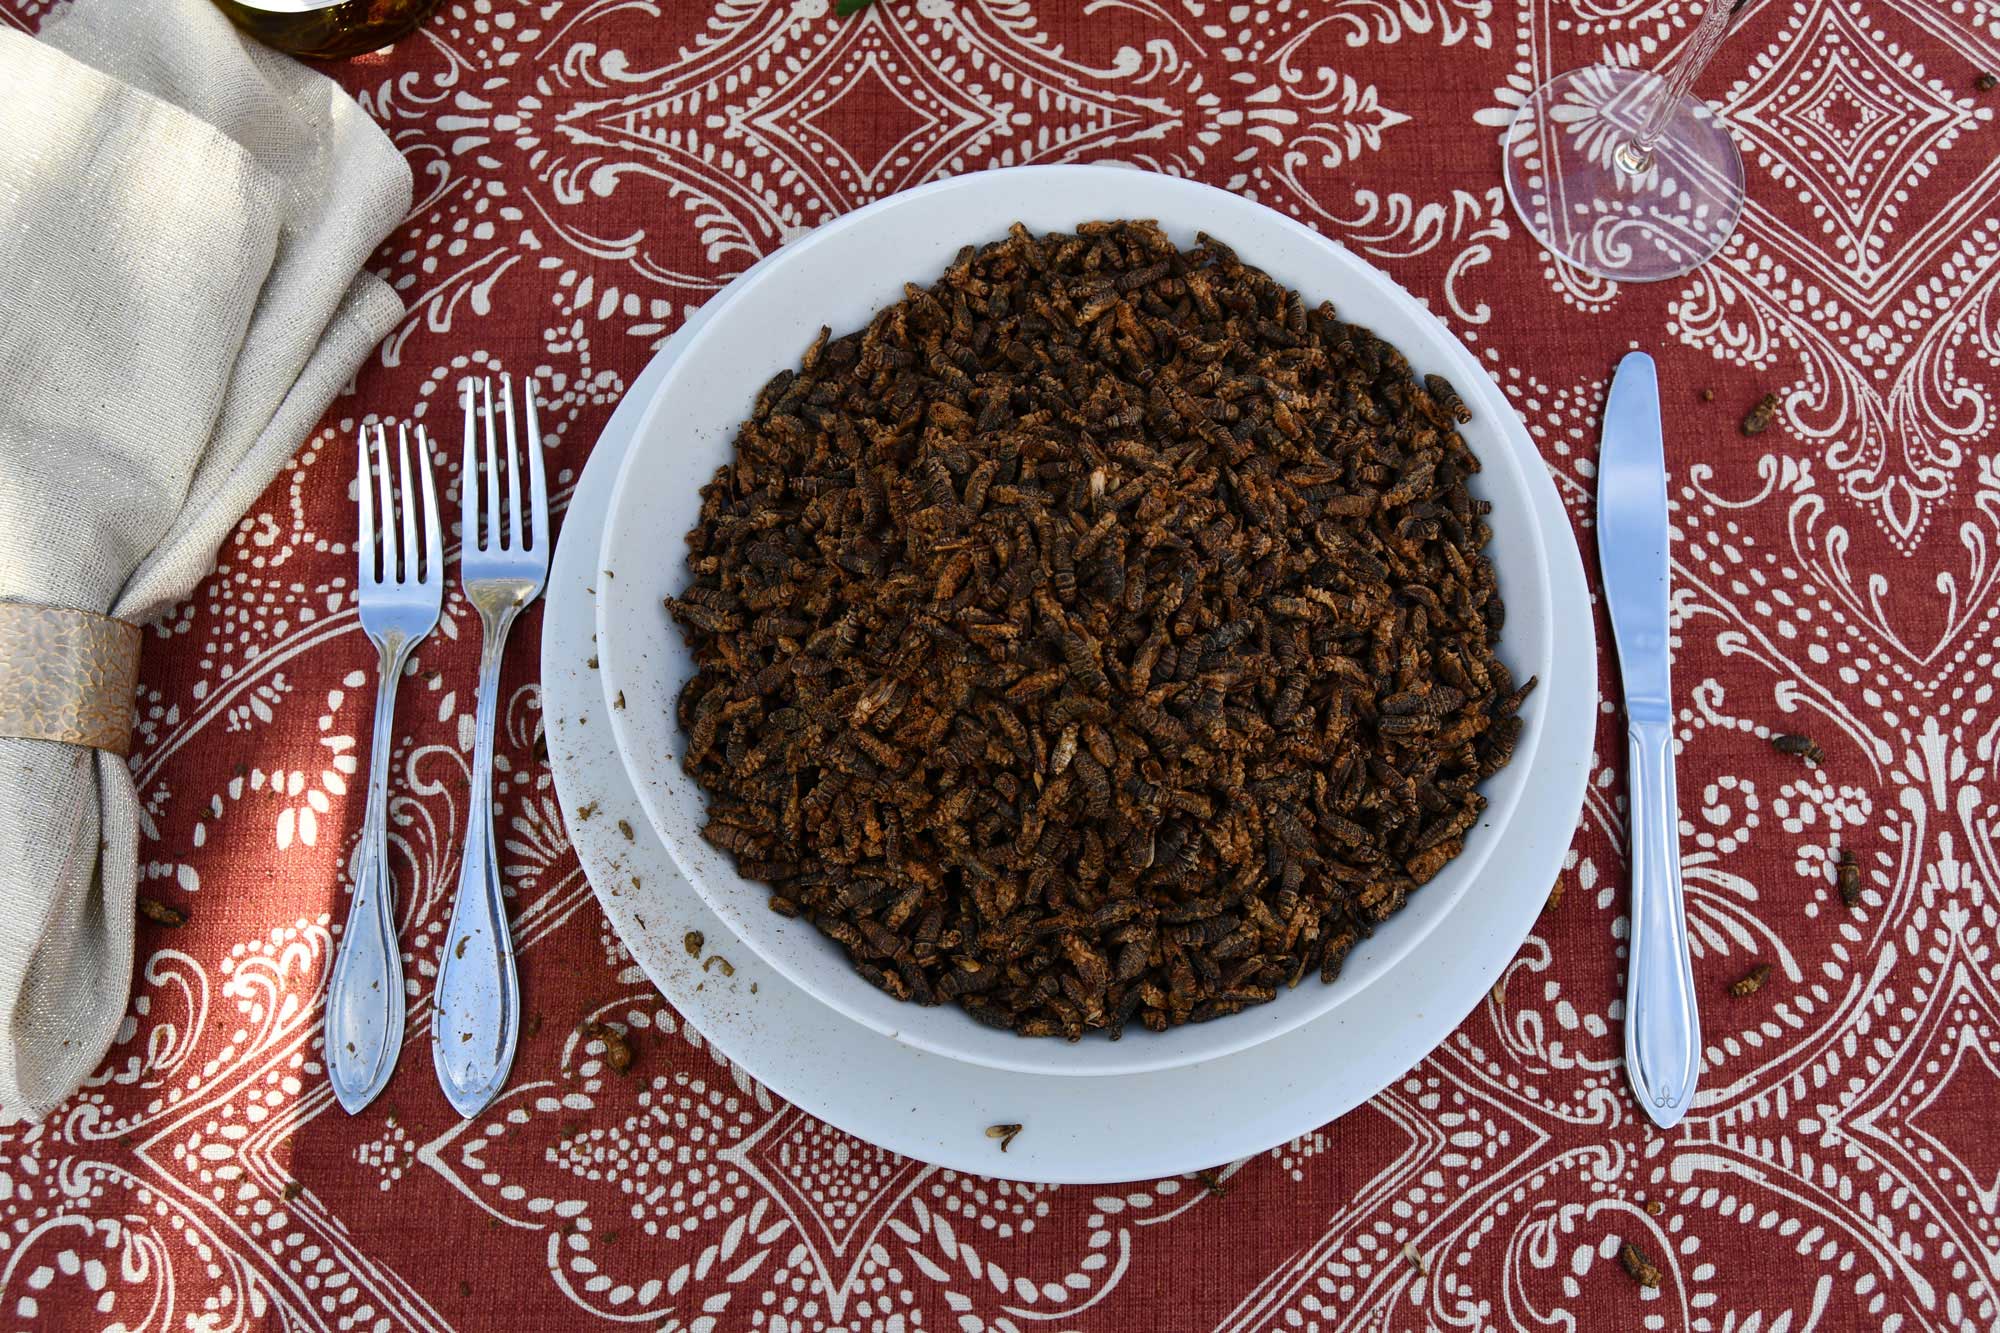 A bowl full on bugs on a table setting.